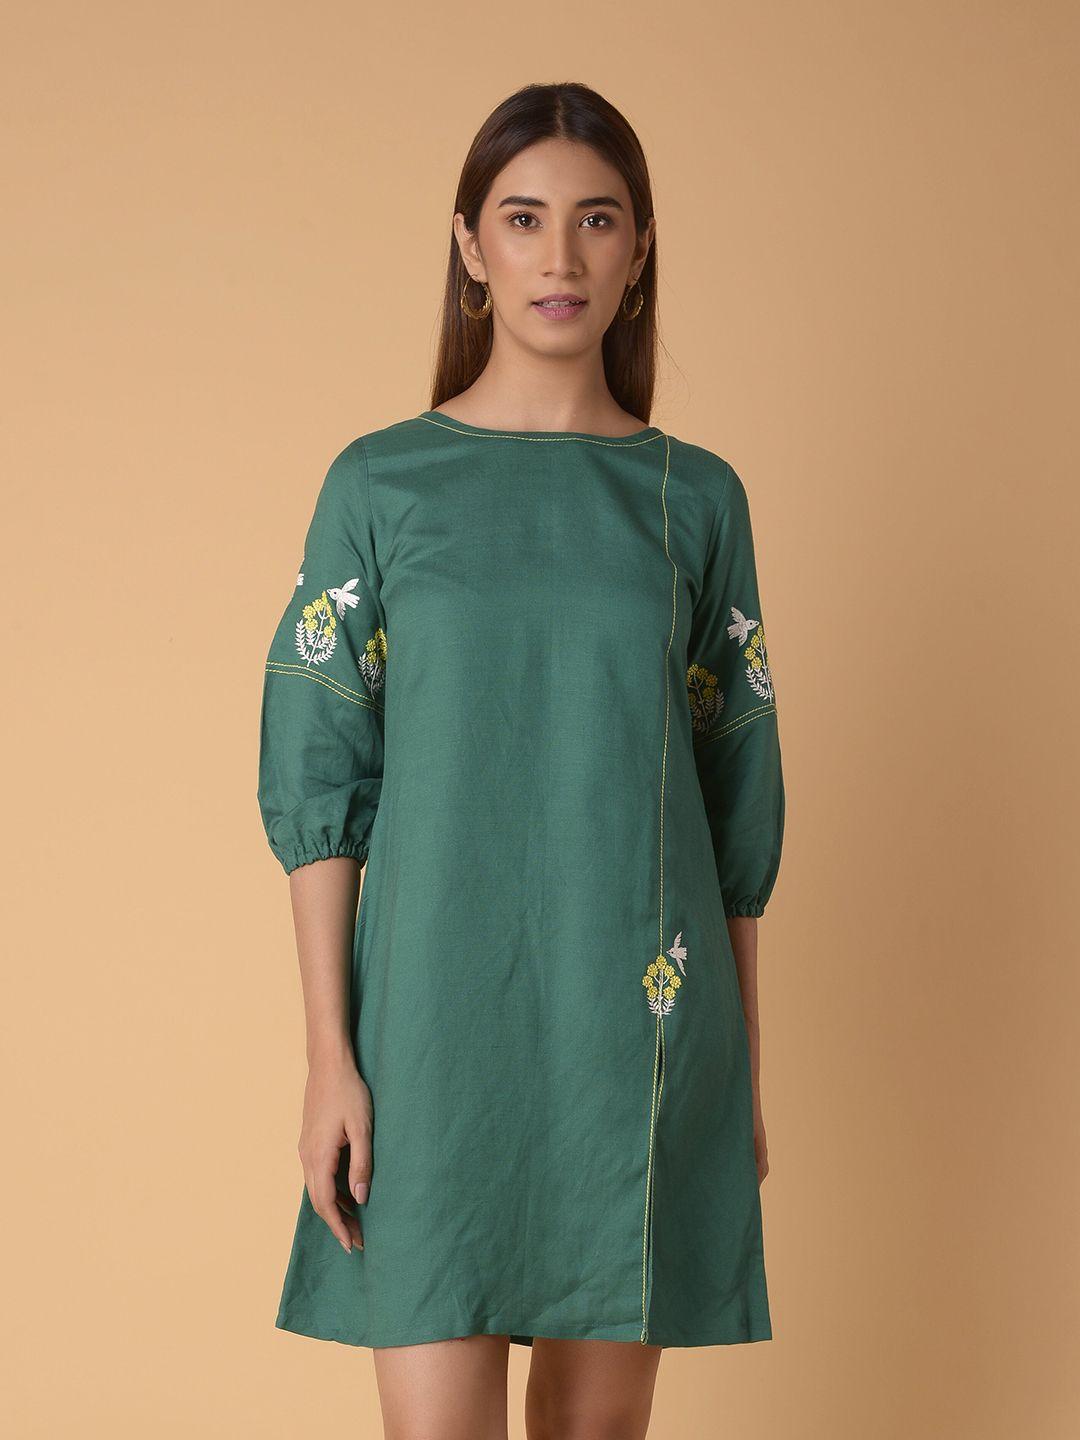 pinksky-boat-neck-cuffed-sleeve-embroidered-pure-cotton-a-line-dress